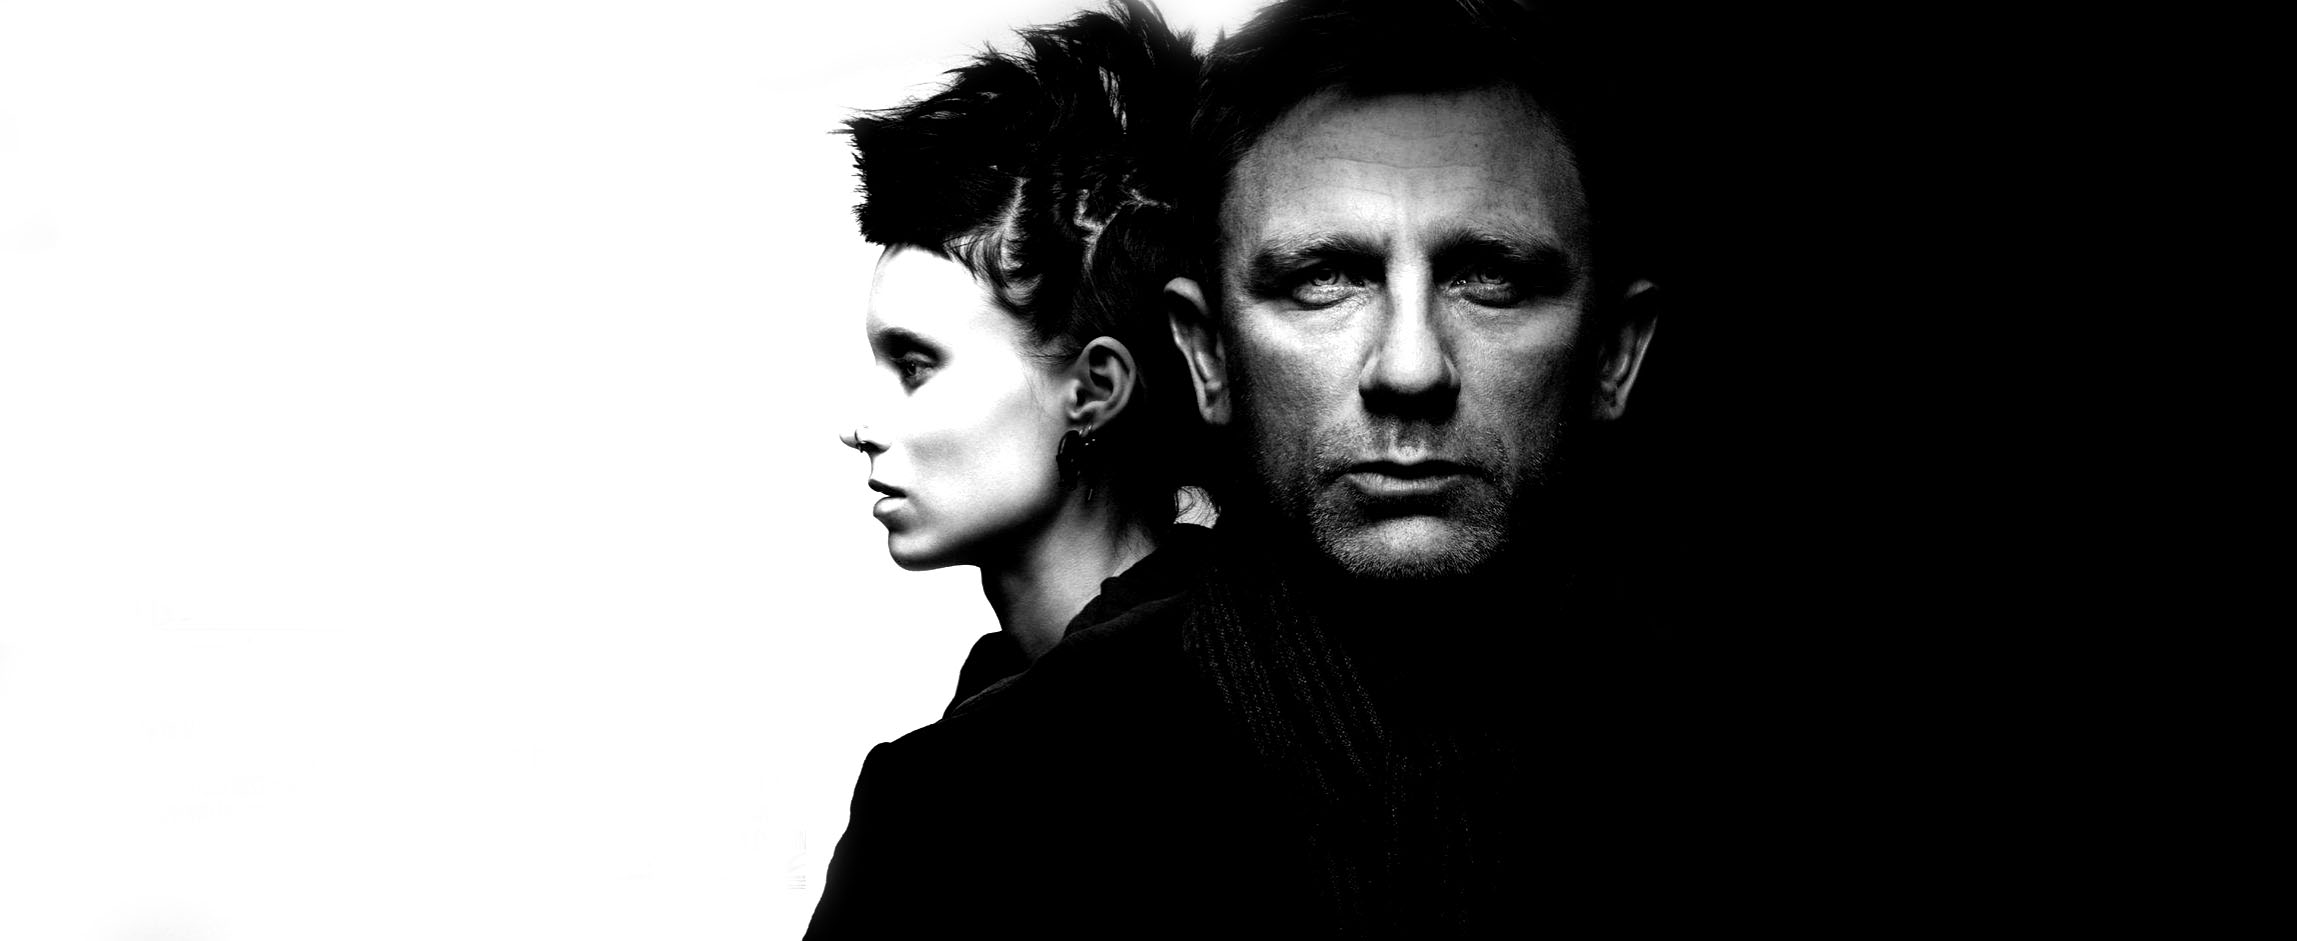 The Girl With The Dragon Tattoo #5